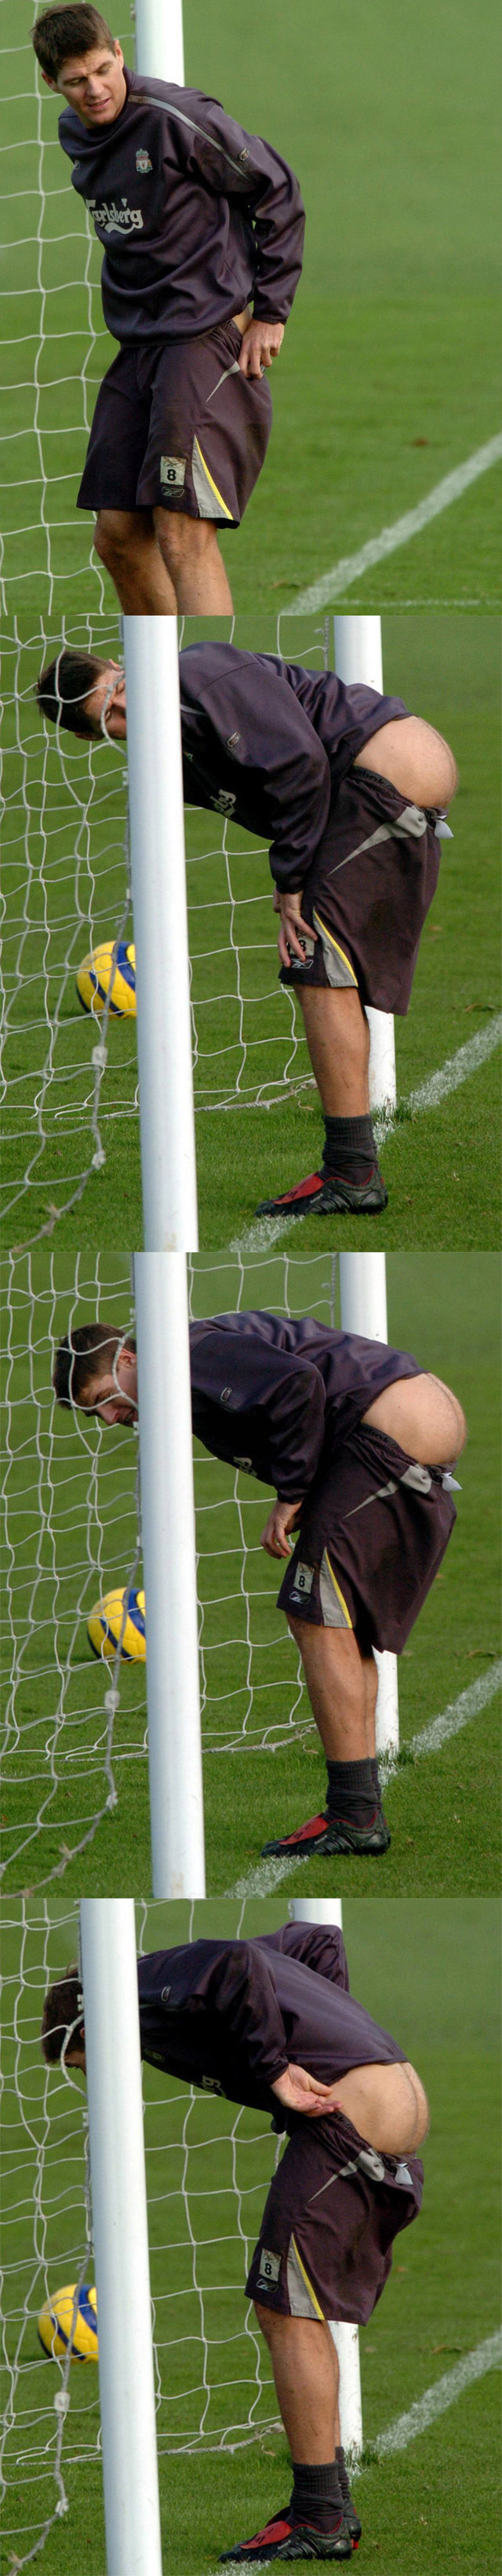 spycam stephen gerrard showing his hairy ass on field